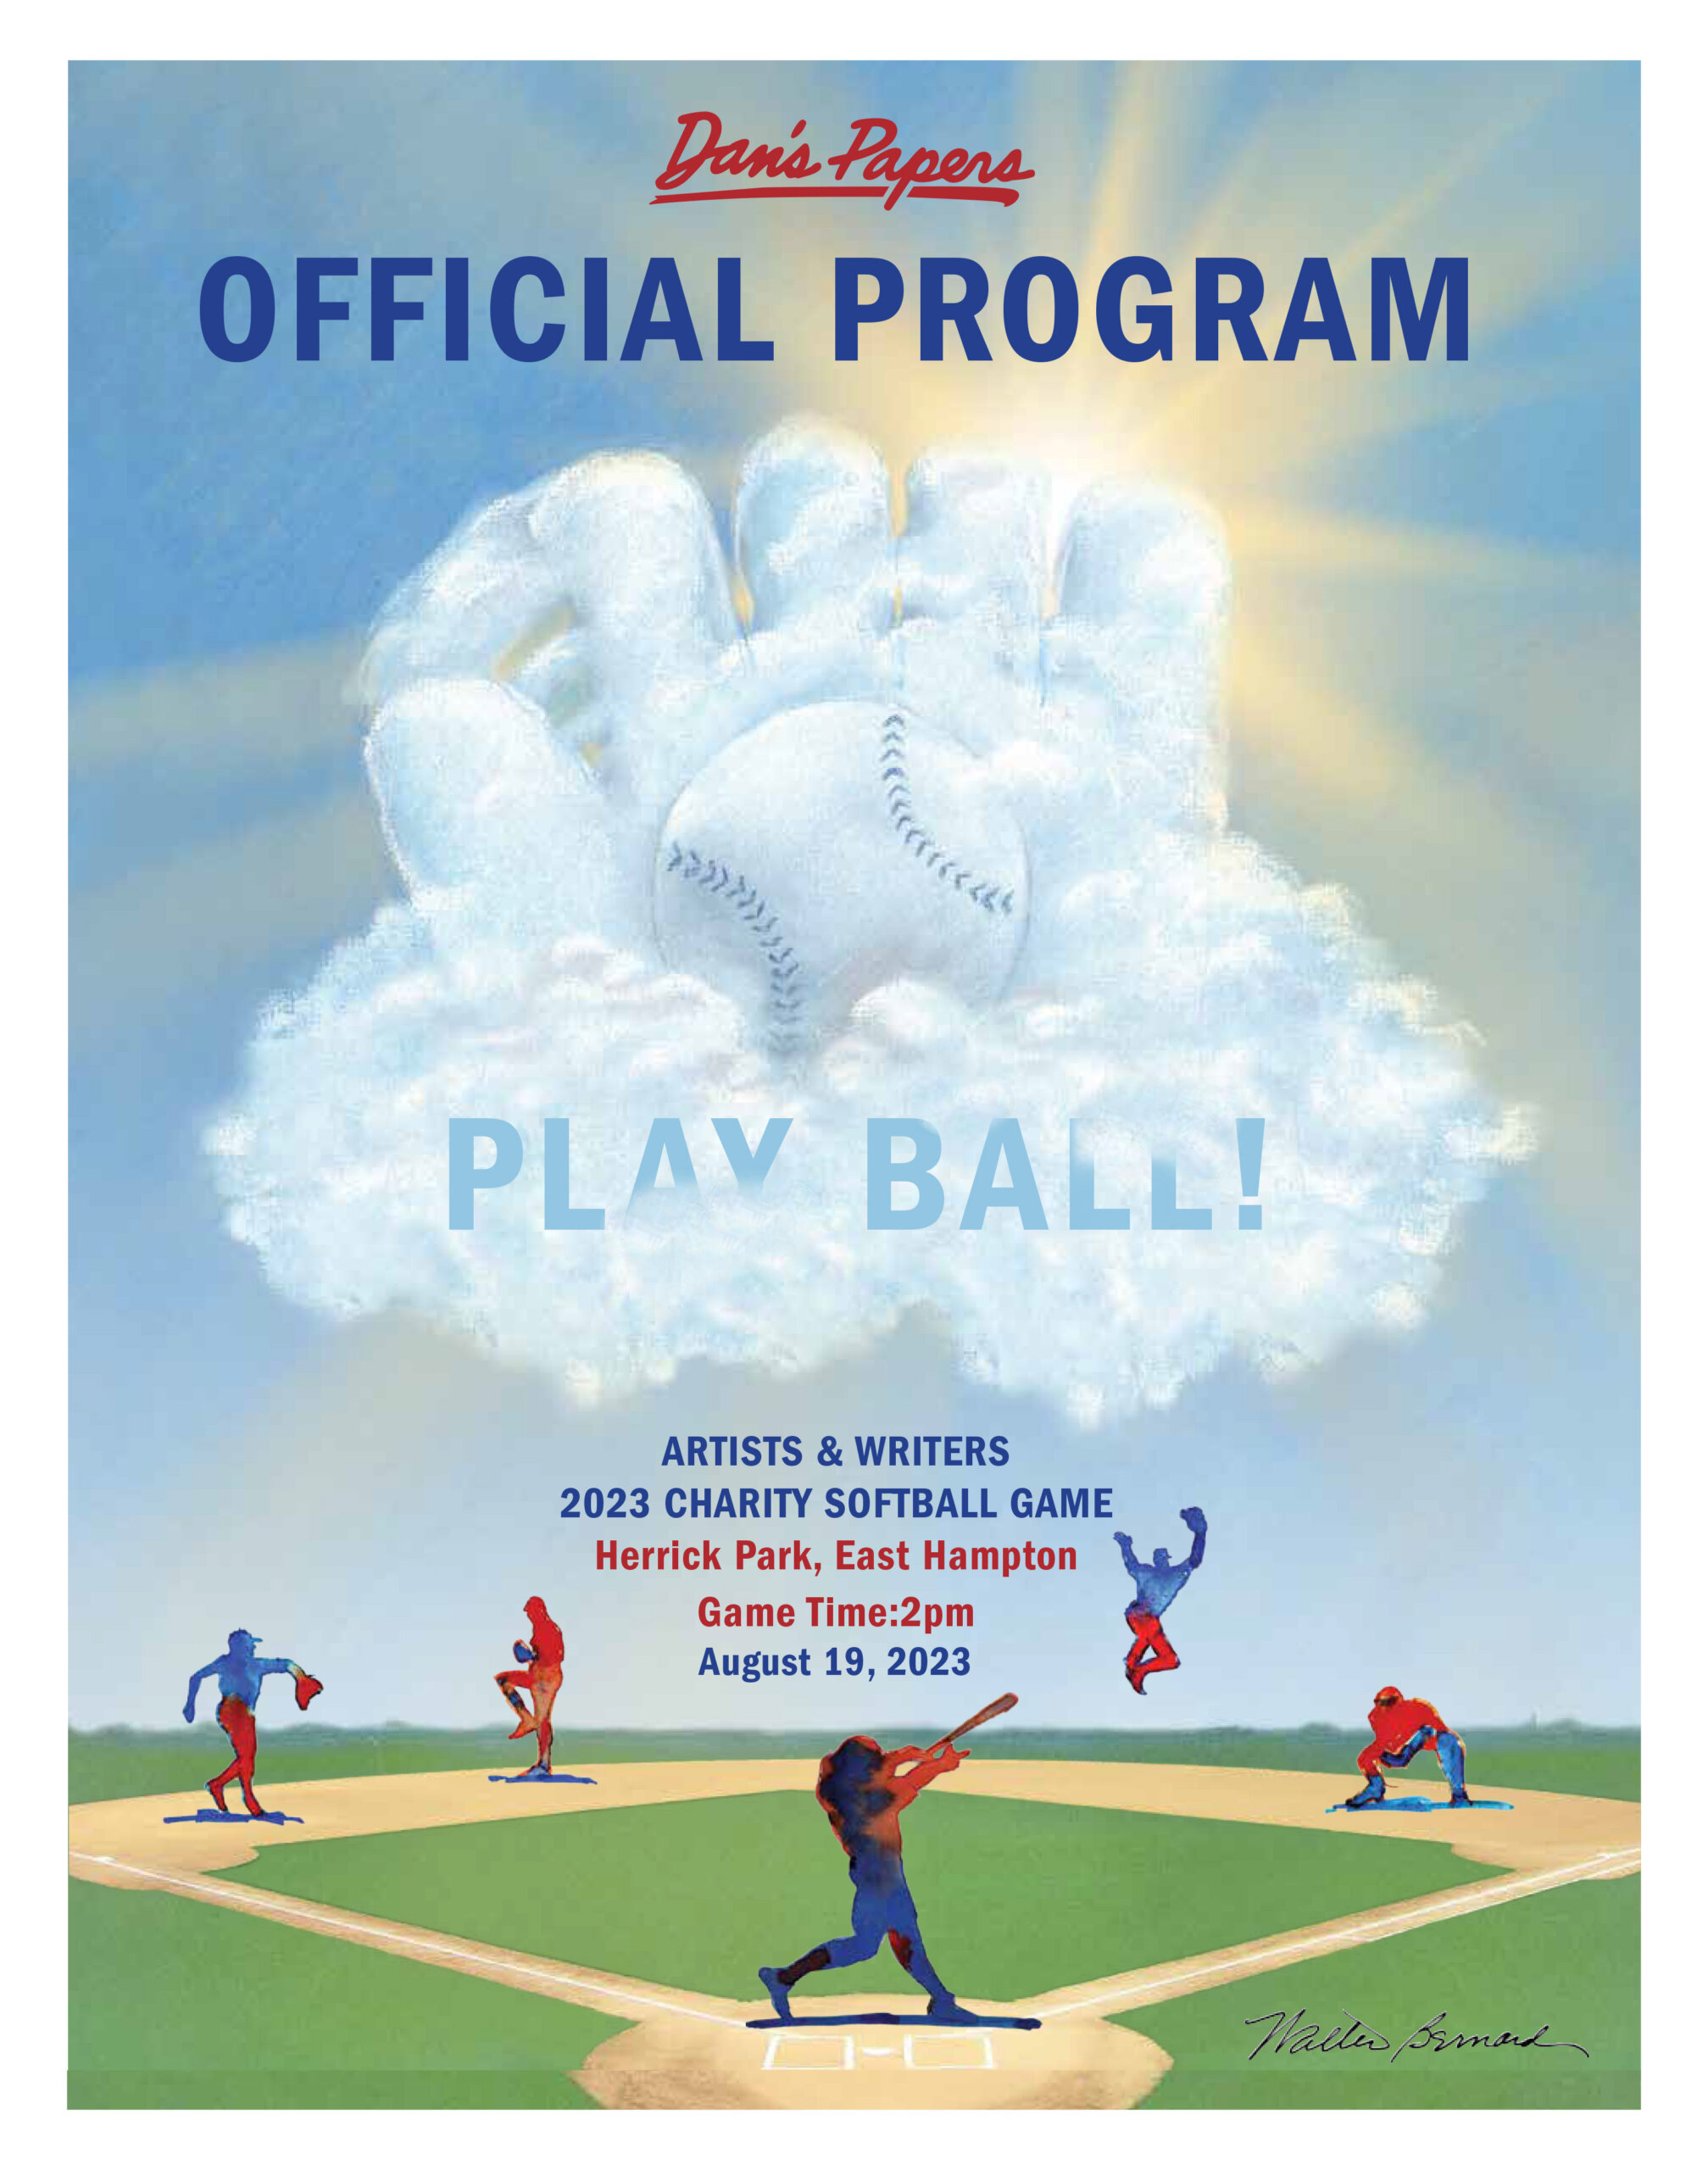 Official Program for the 2023 Artists & Writers Charity Softball Game by Walter Bernard